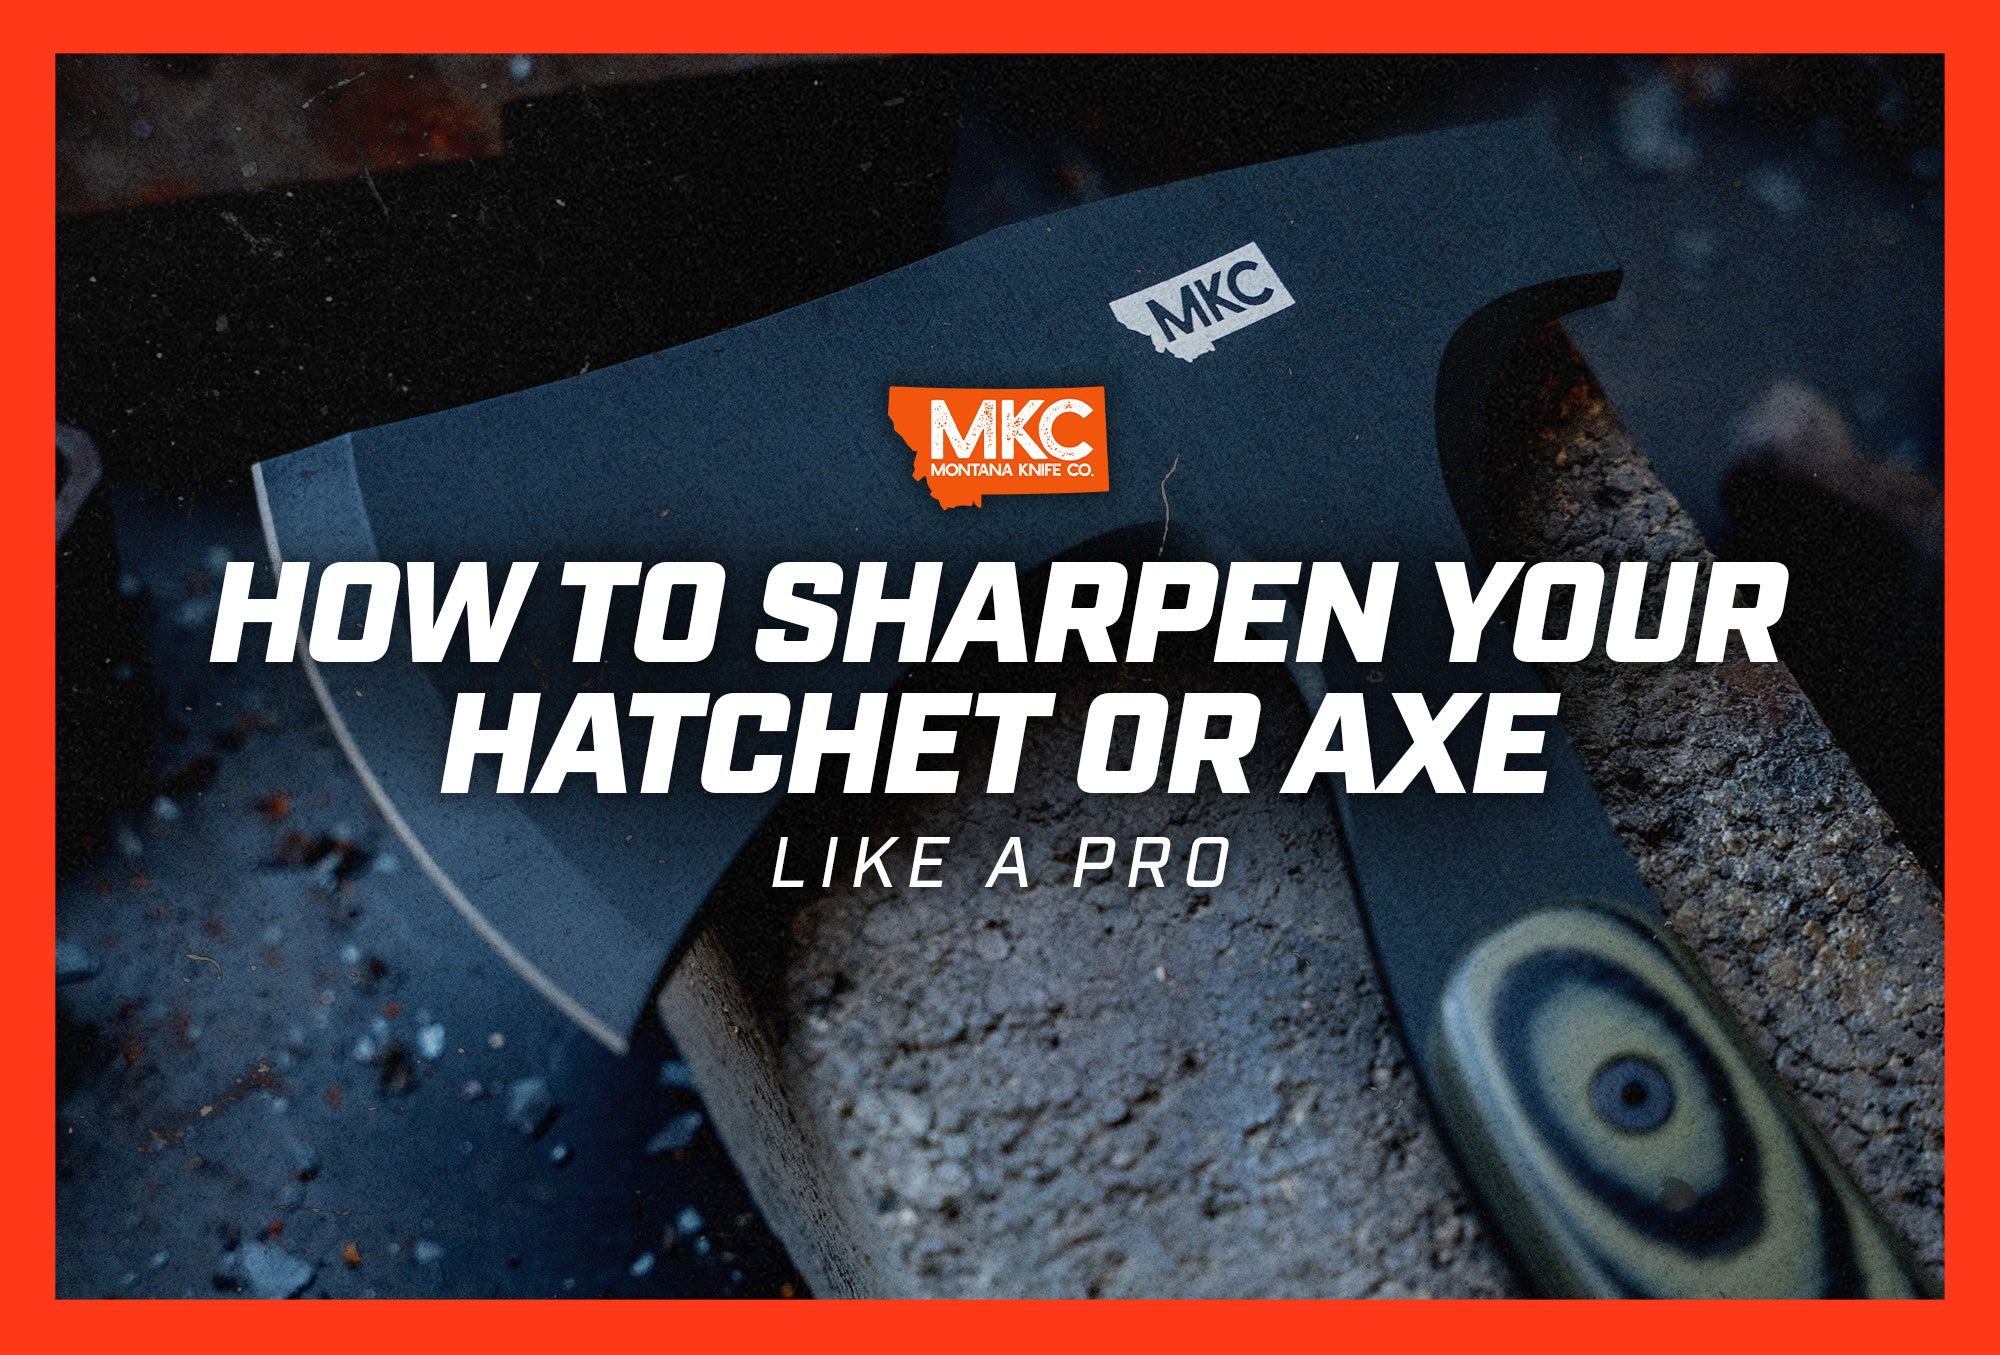 How to Sharpen Your Hatchet or Axe Like a Pro